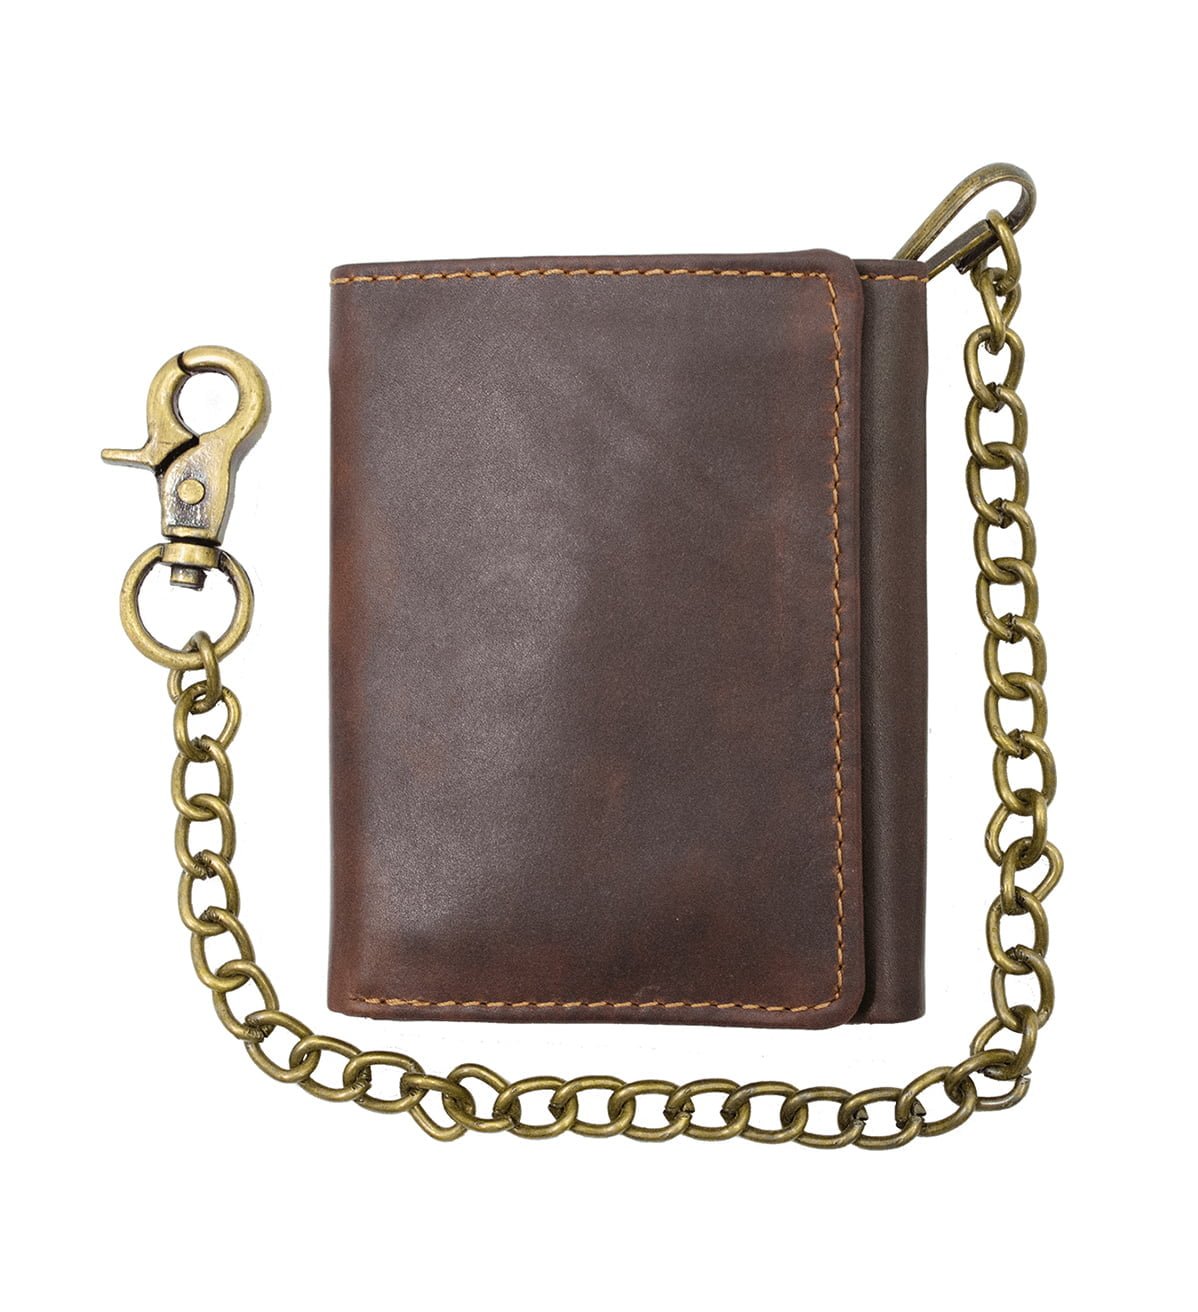 Trifold Hunter Biker Chain Wallet Genuine Leather with RFID Blocking - #BW-04H RF